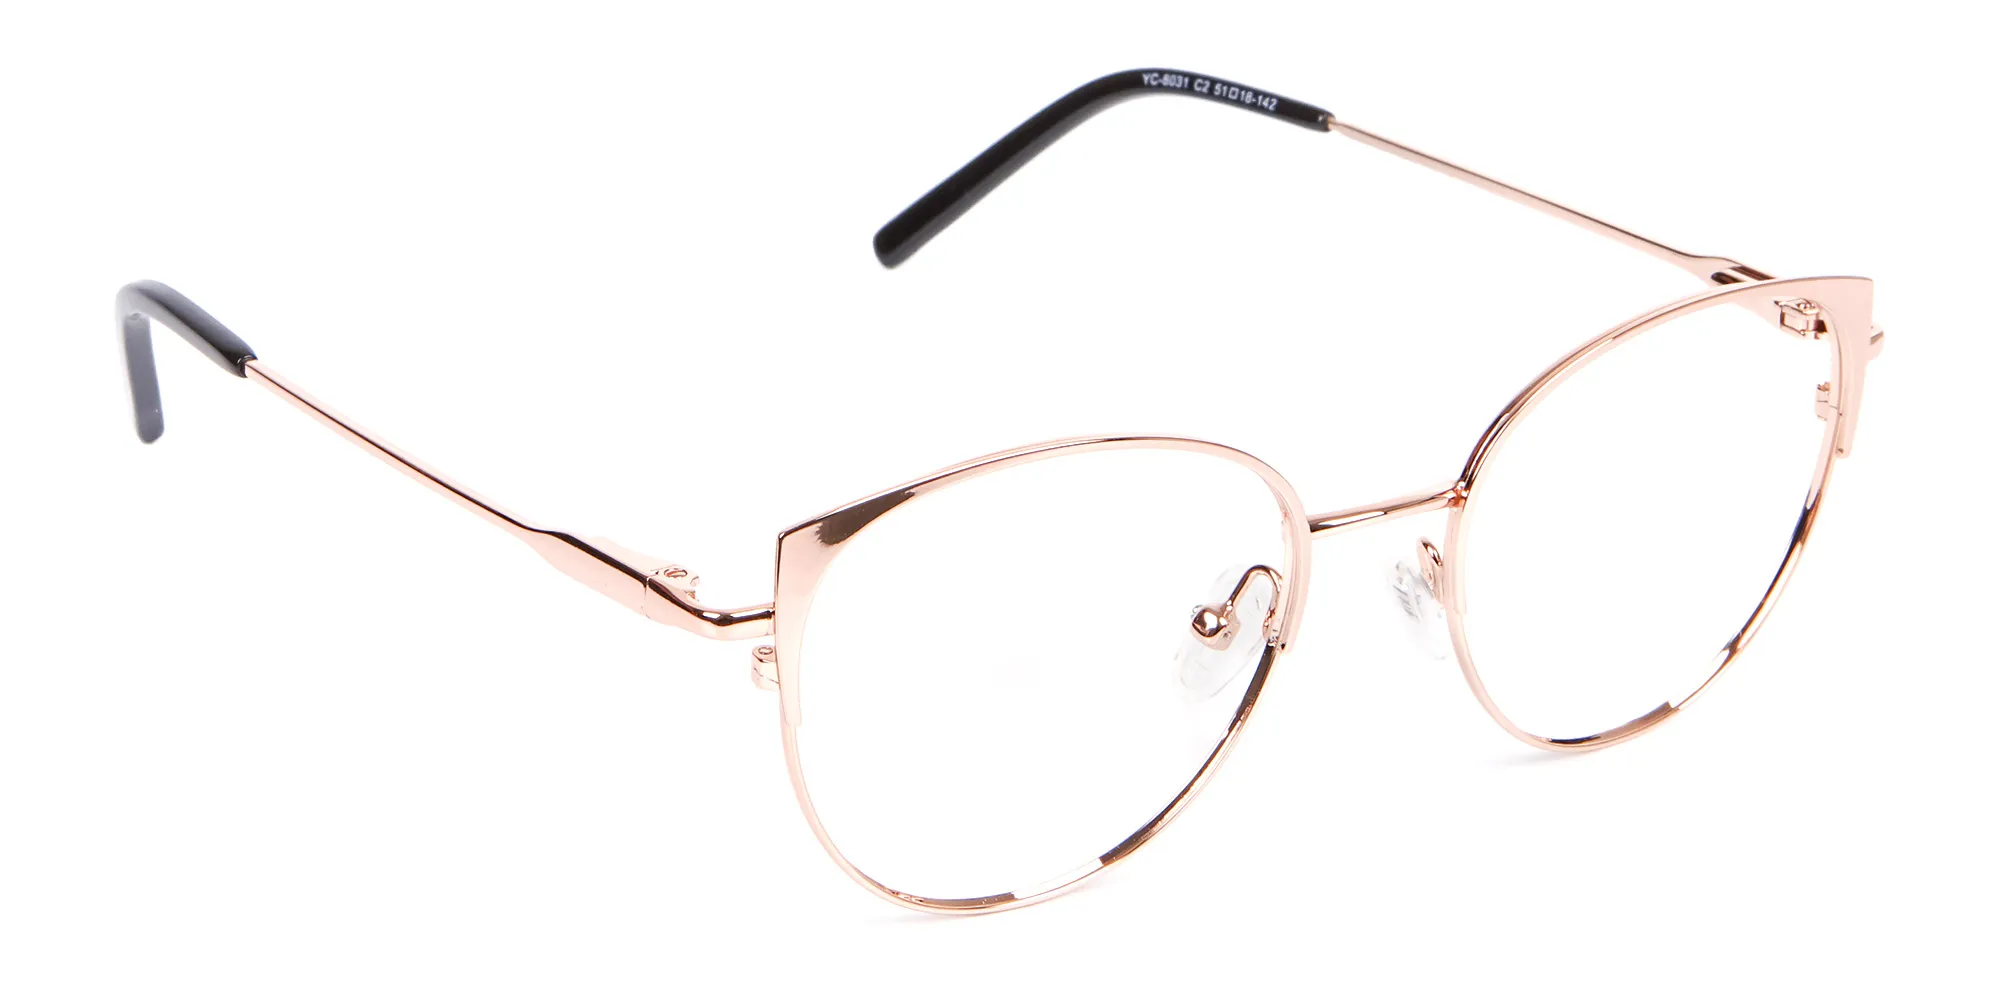 Classic Textured Glasses in Rose-Gold - 2